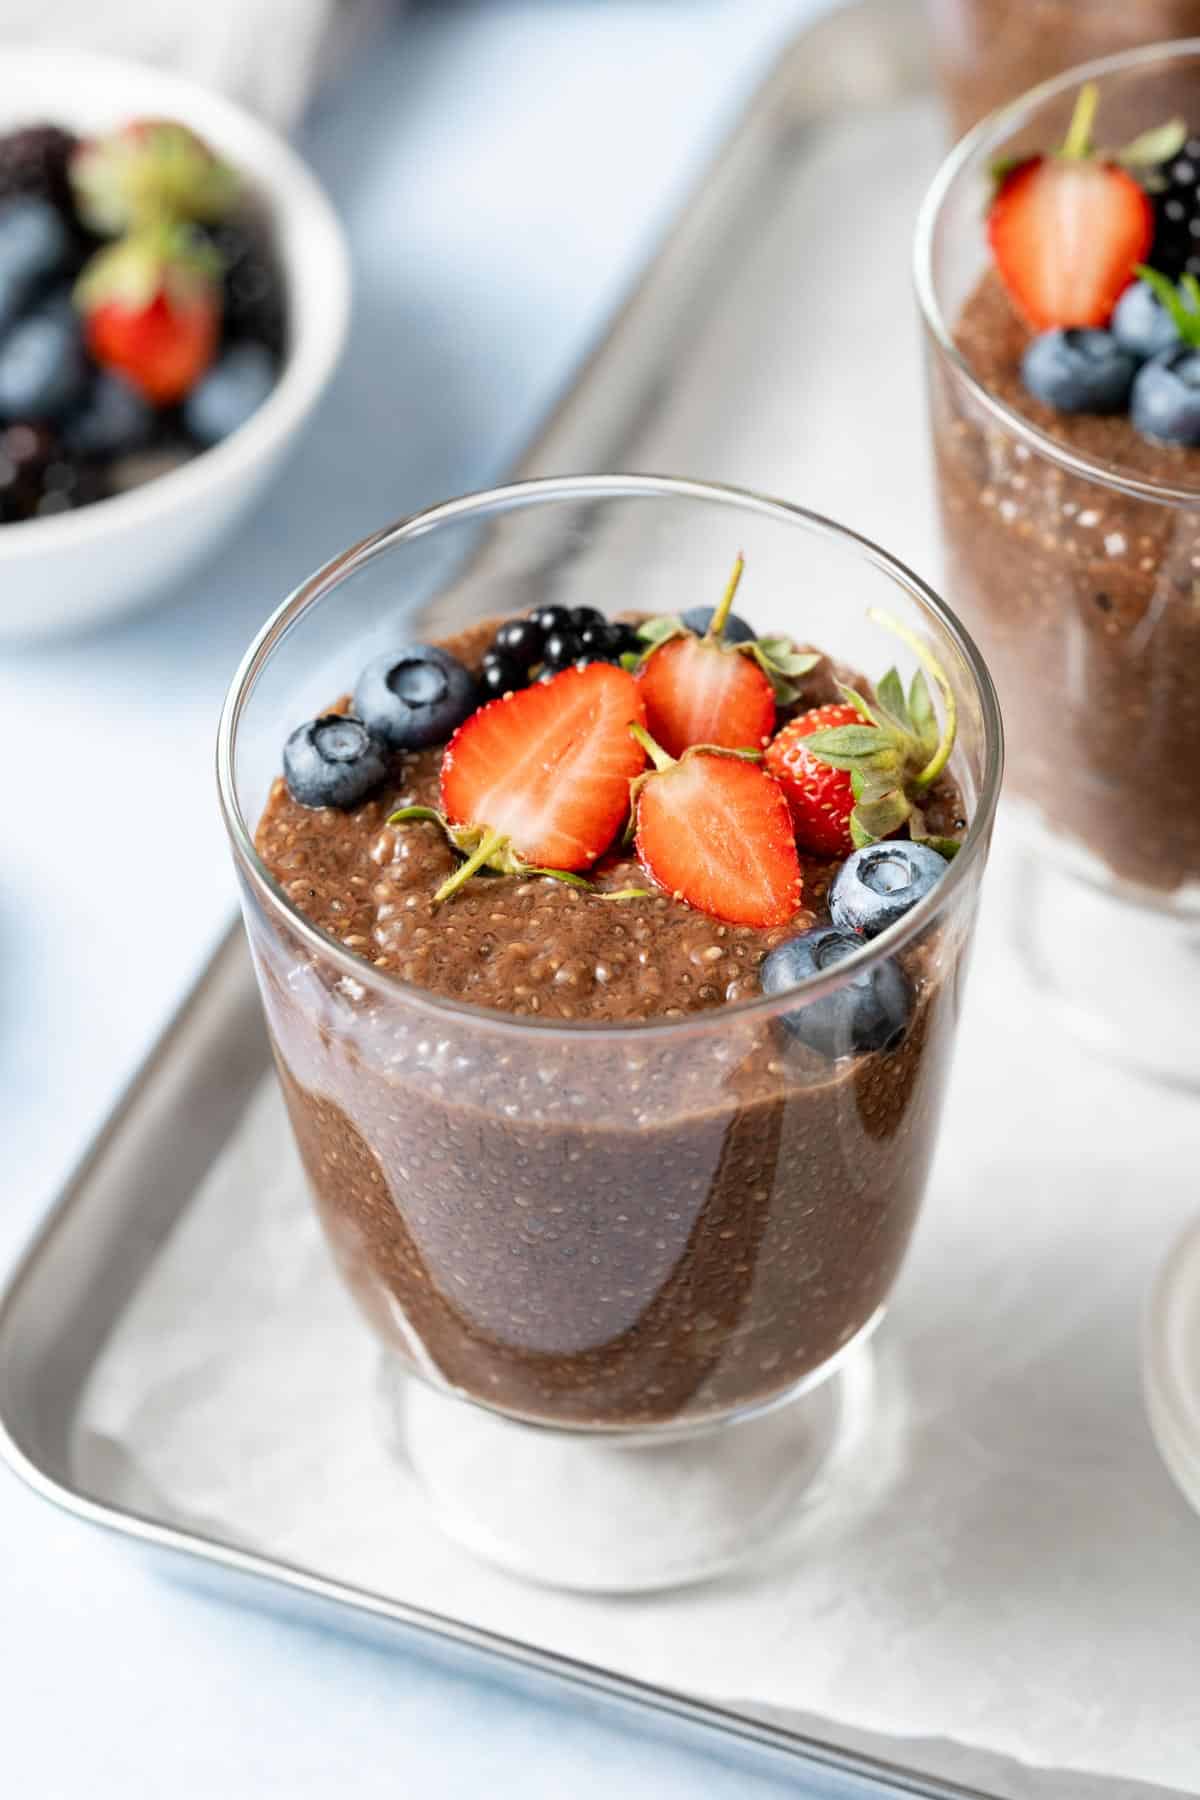 Fresh strawberries and blueberries on top of a bowl of chocolate chia pudding.